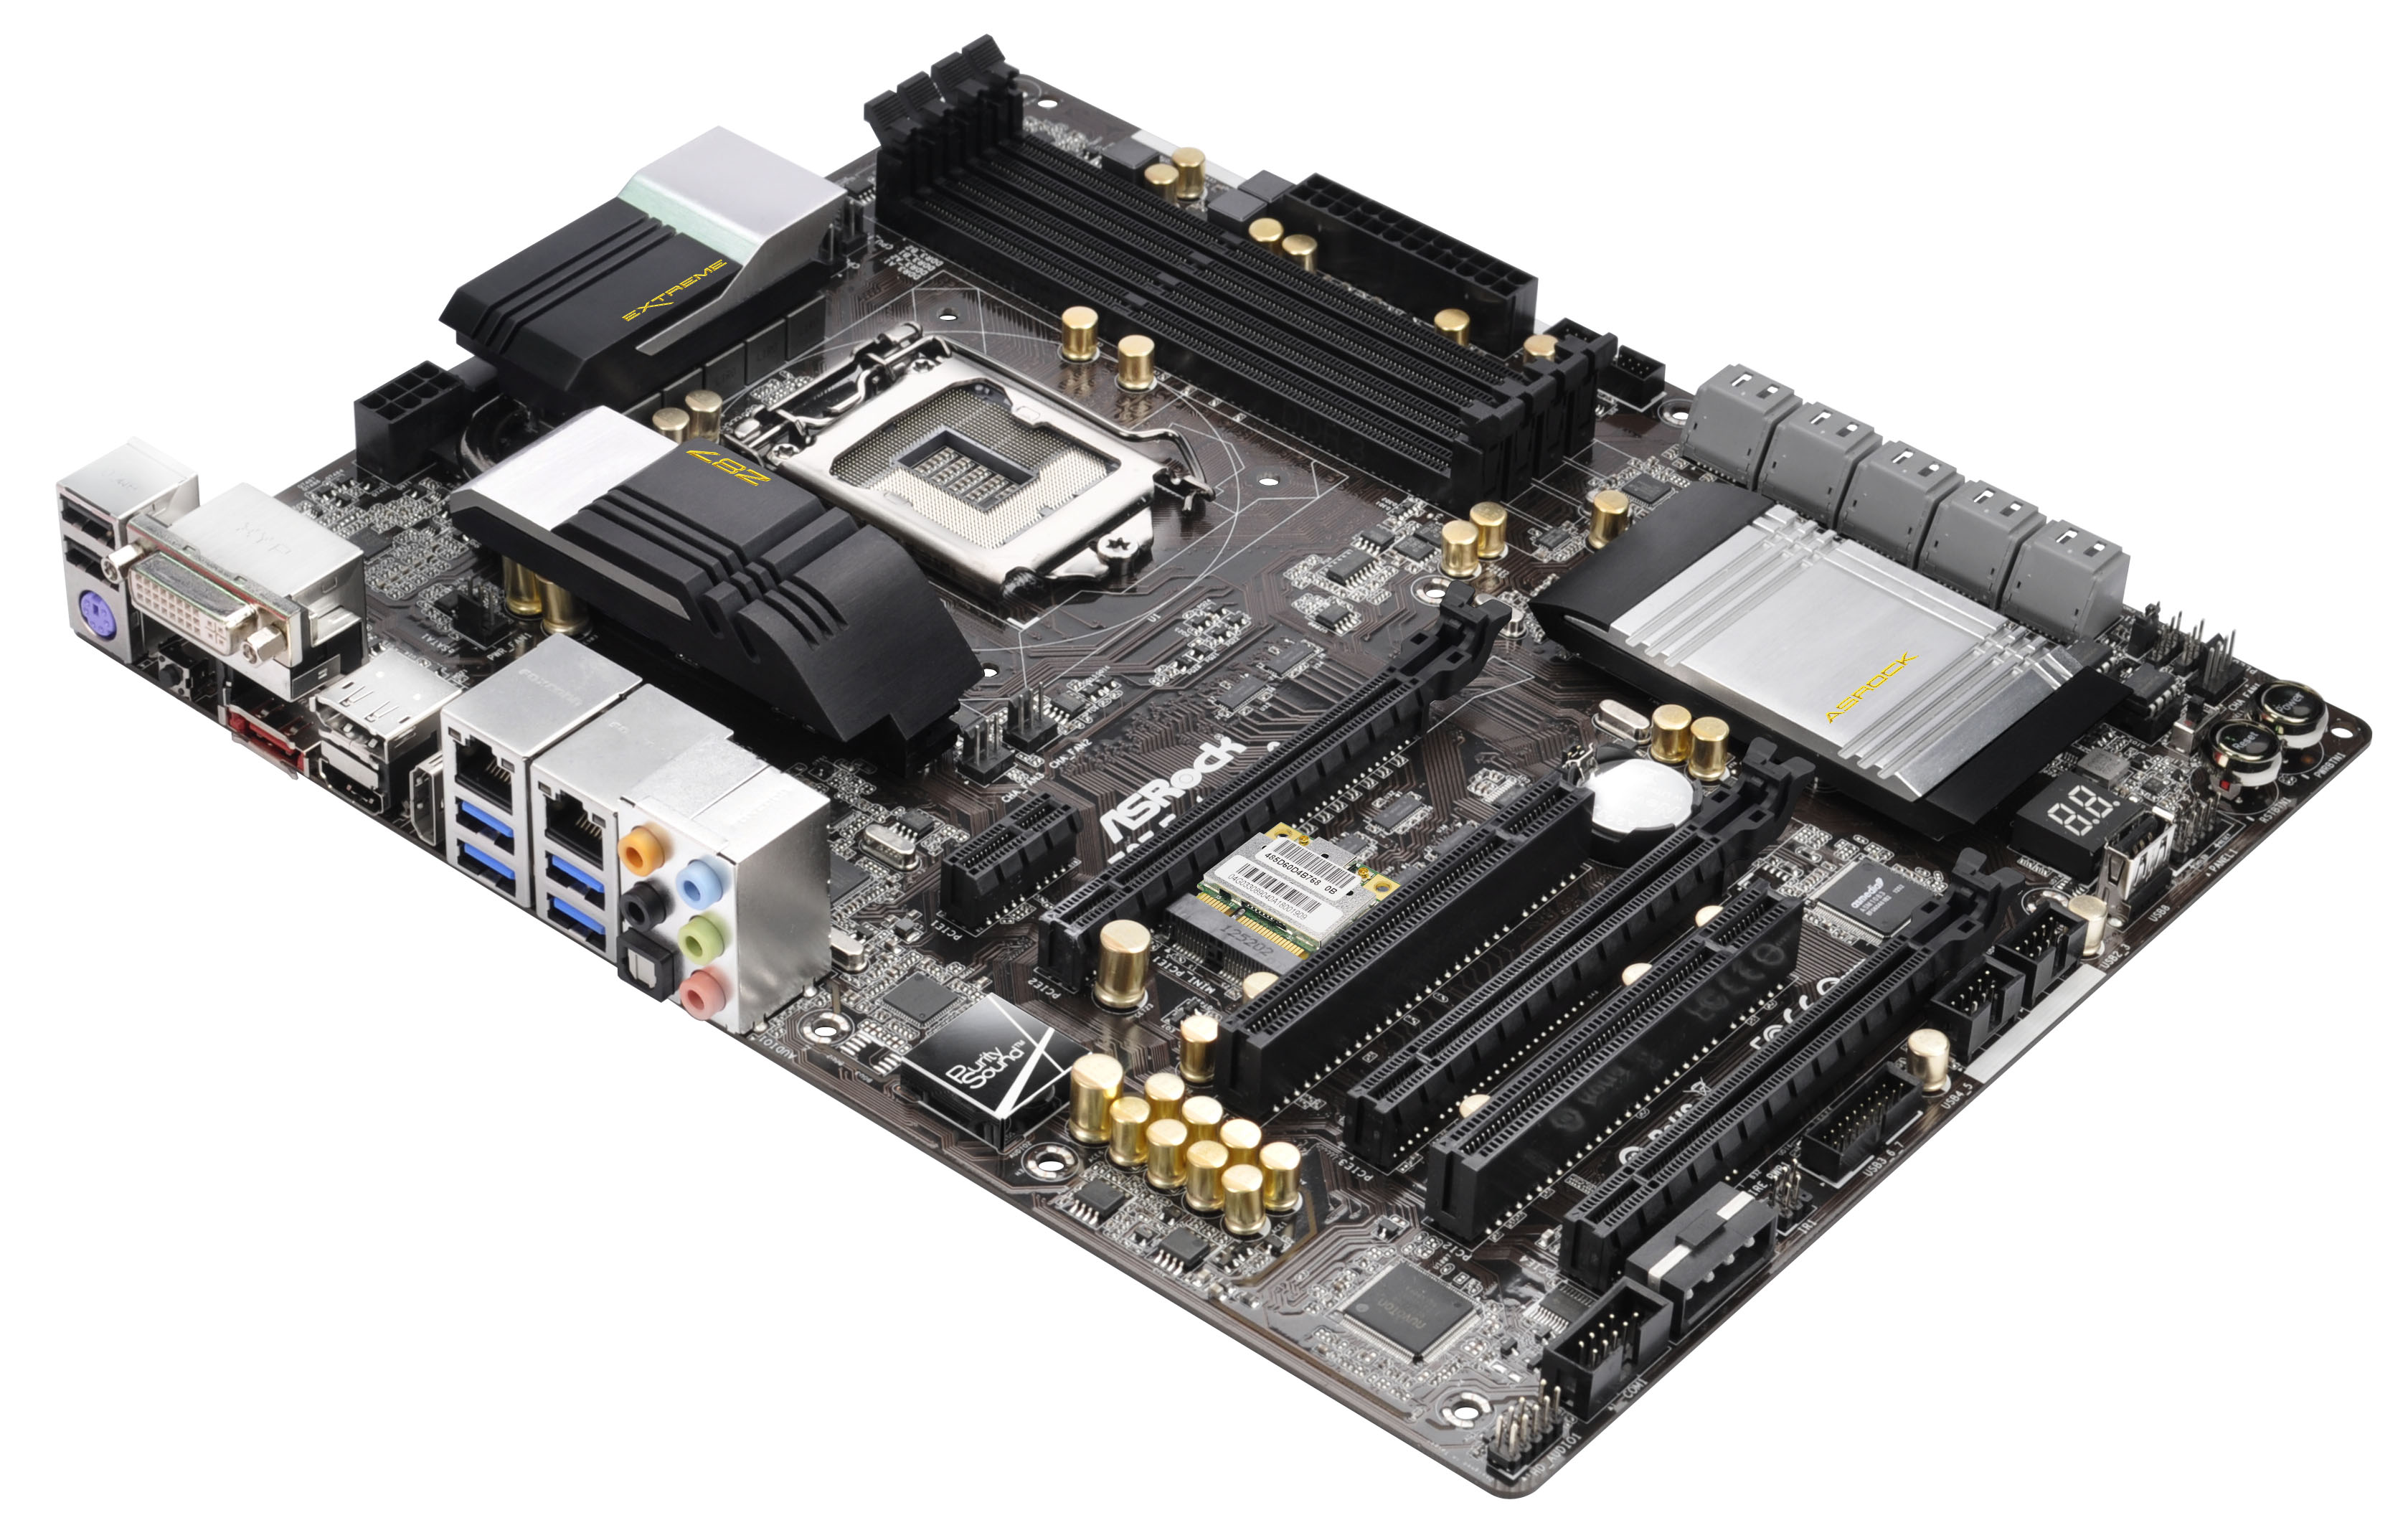 ASRock Z87 Extreme6/AC Overview, Visual Inspection, Board Features